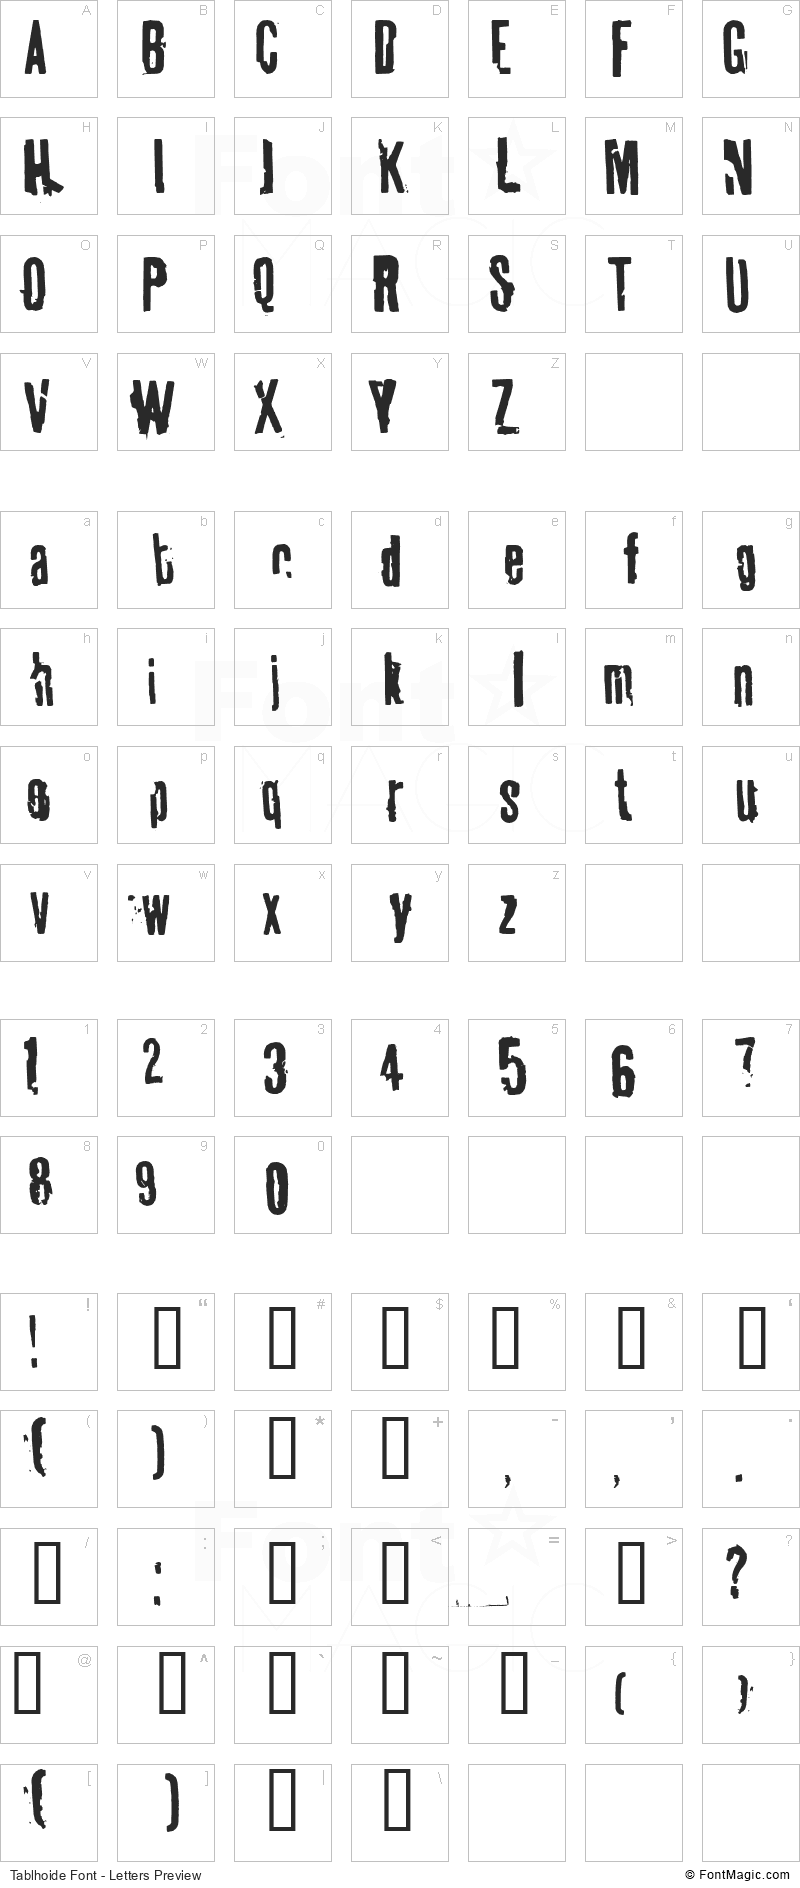 Tablhoide Font - All Latters Preview Chart